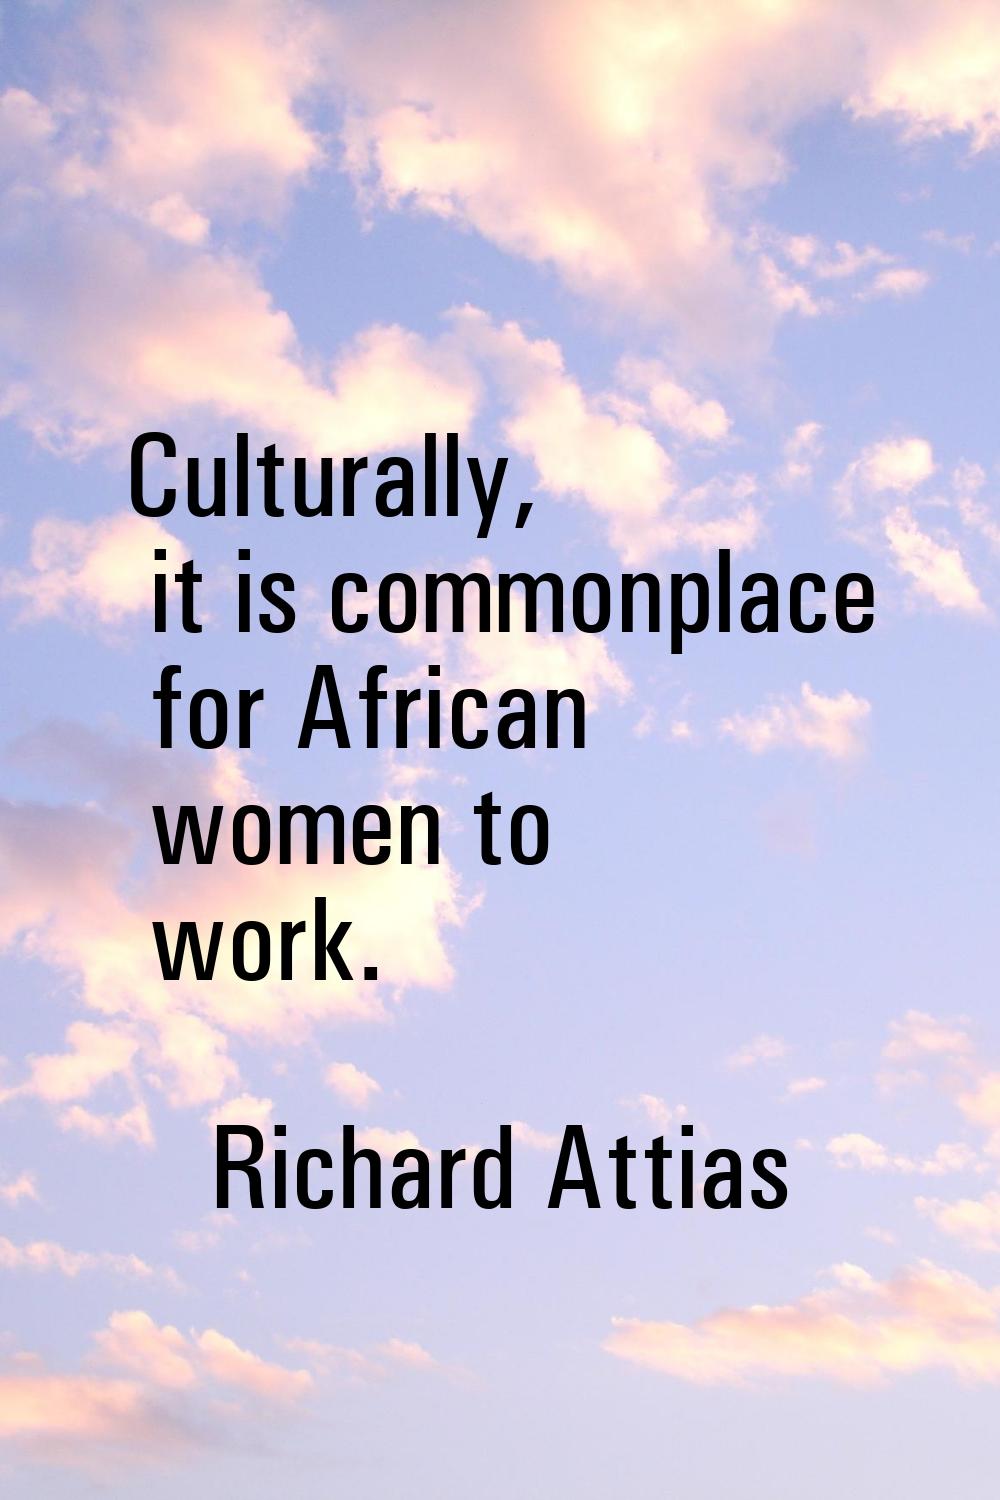 Culturally, it is commonplace for African women to work.